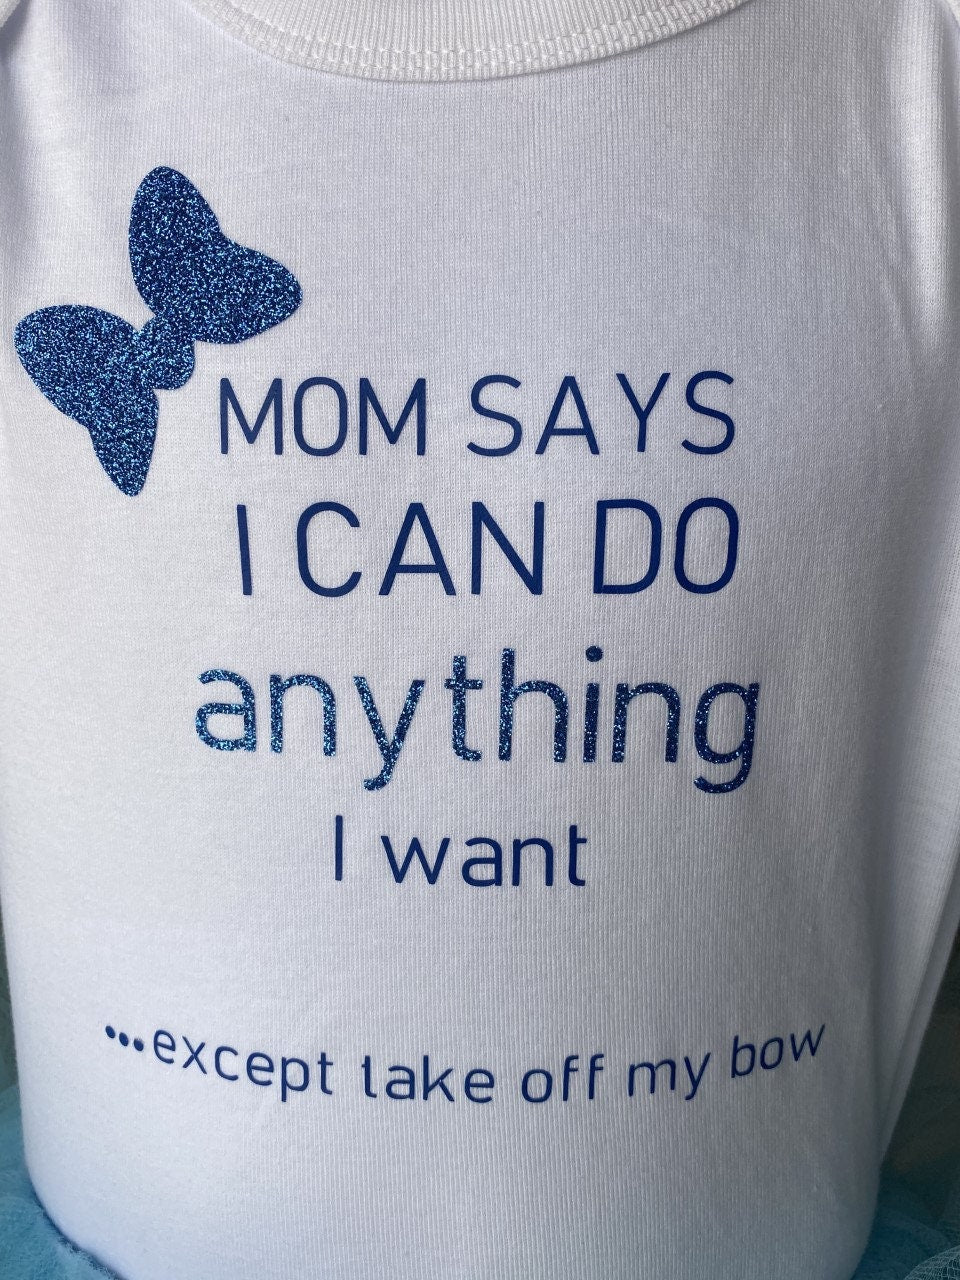 Mom says I can do anything except take off my bow / funny shirt/ funny girls shirt / funny kids shirt / funny t shirt / funny bow gift